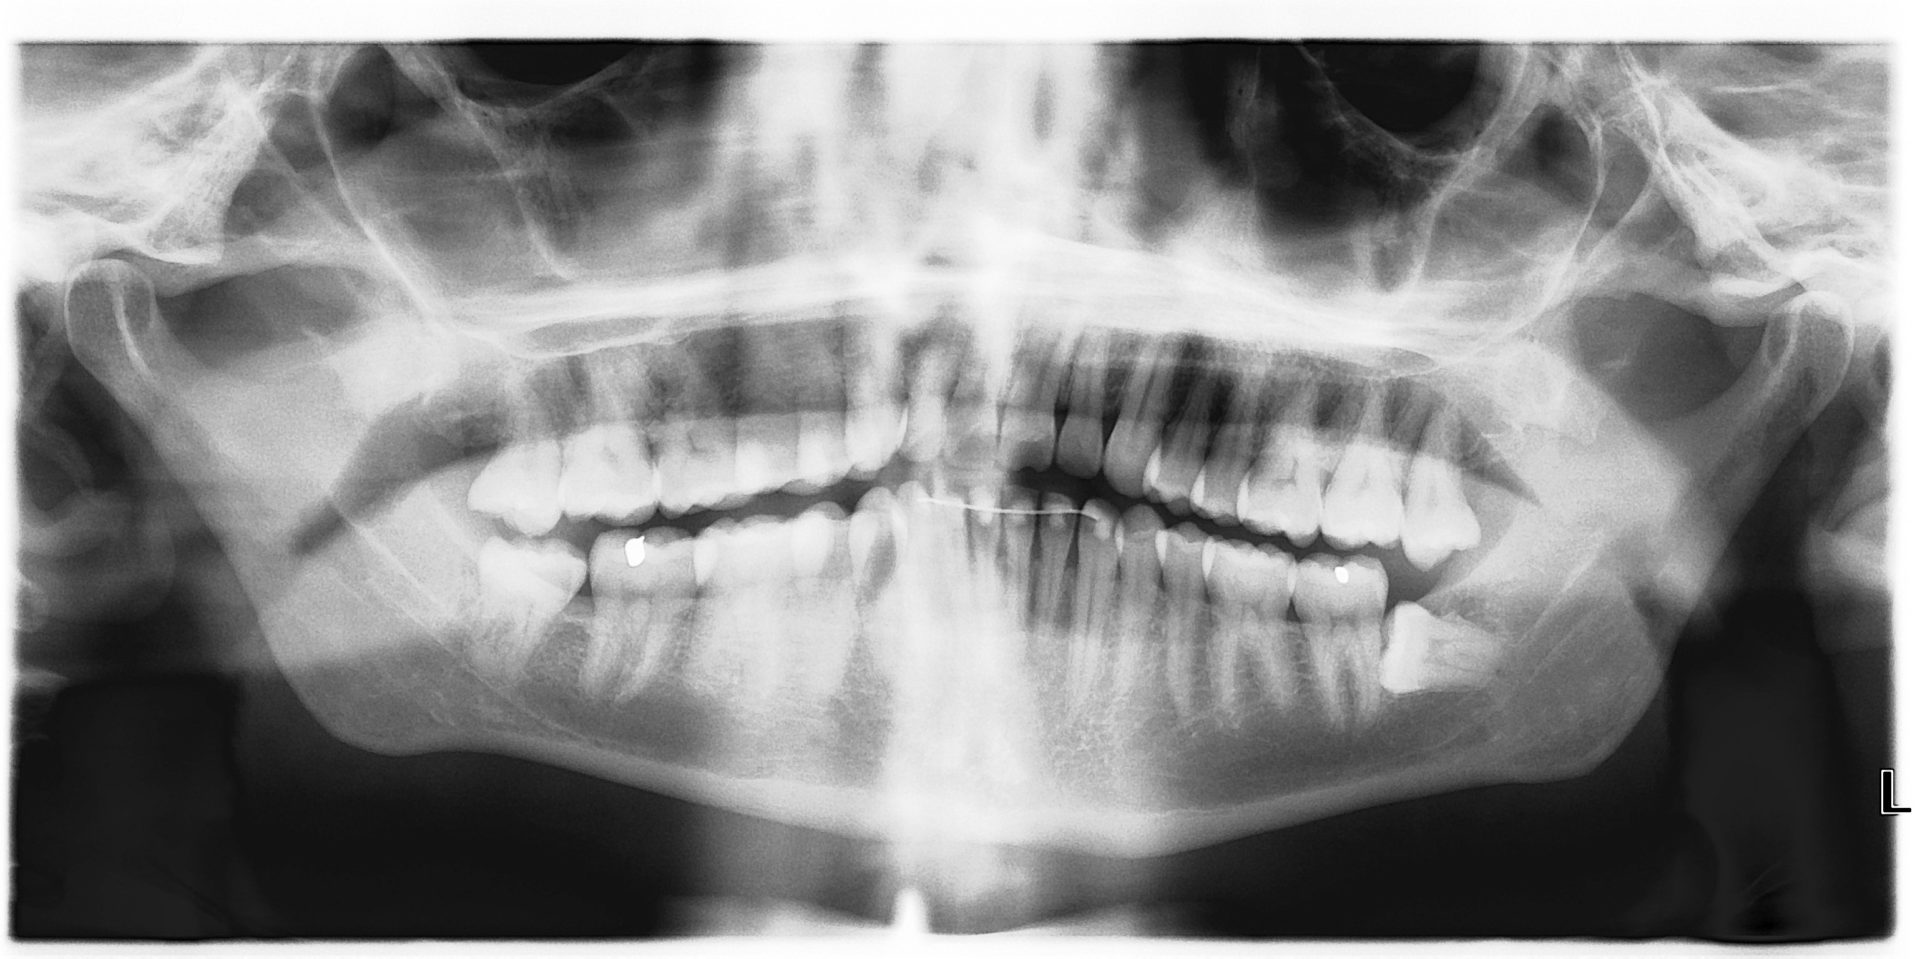 Meddlesome Molars Wisdom Tooth Removal Springfield Dental Group